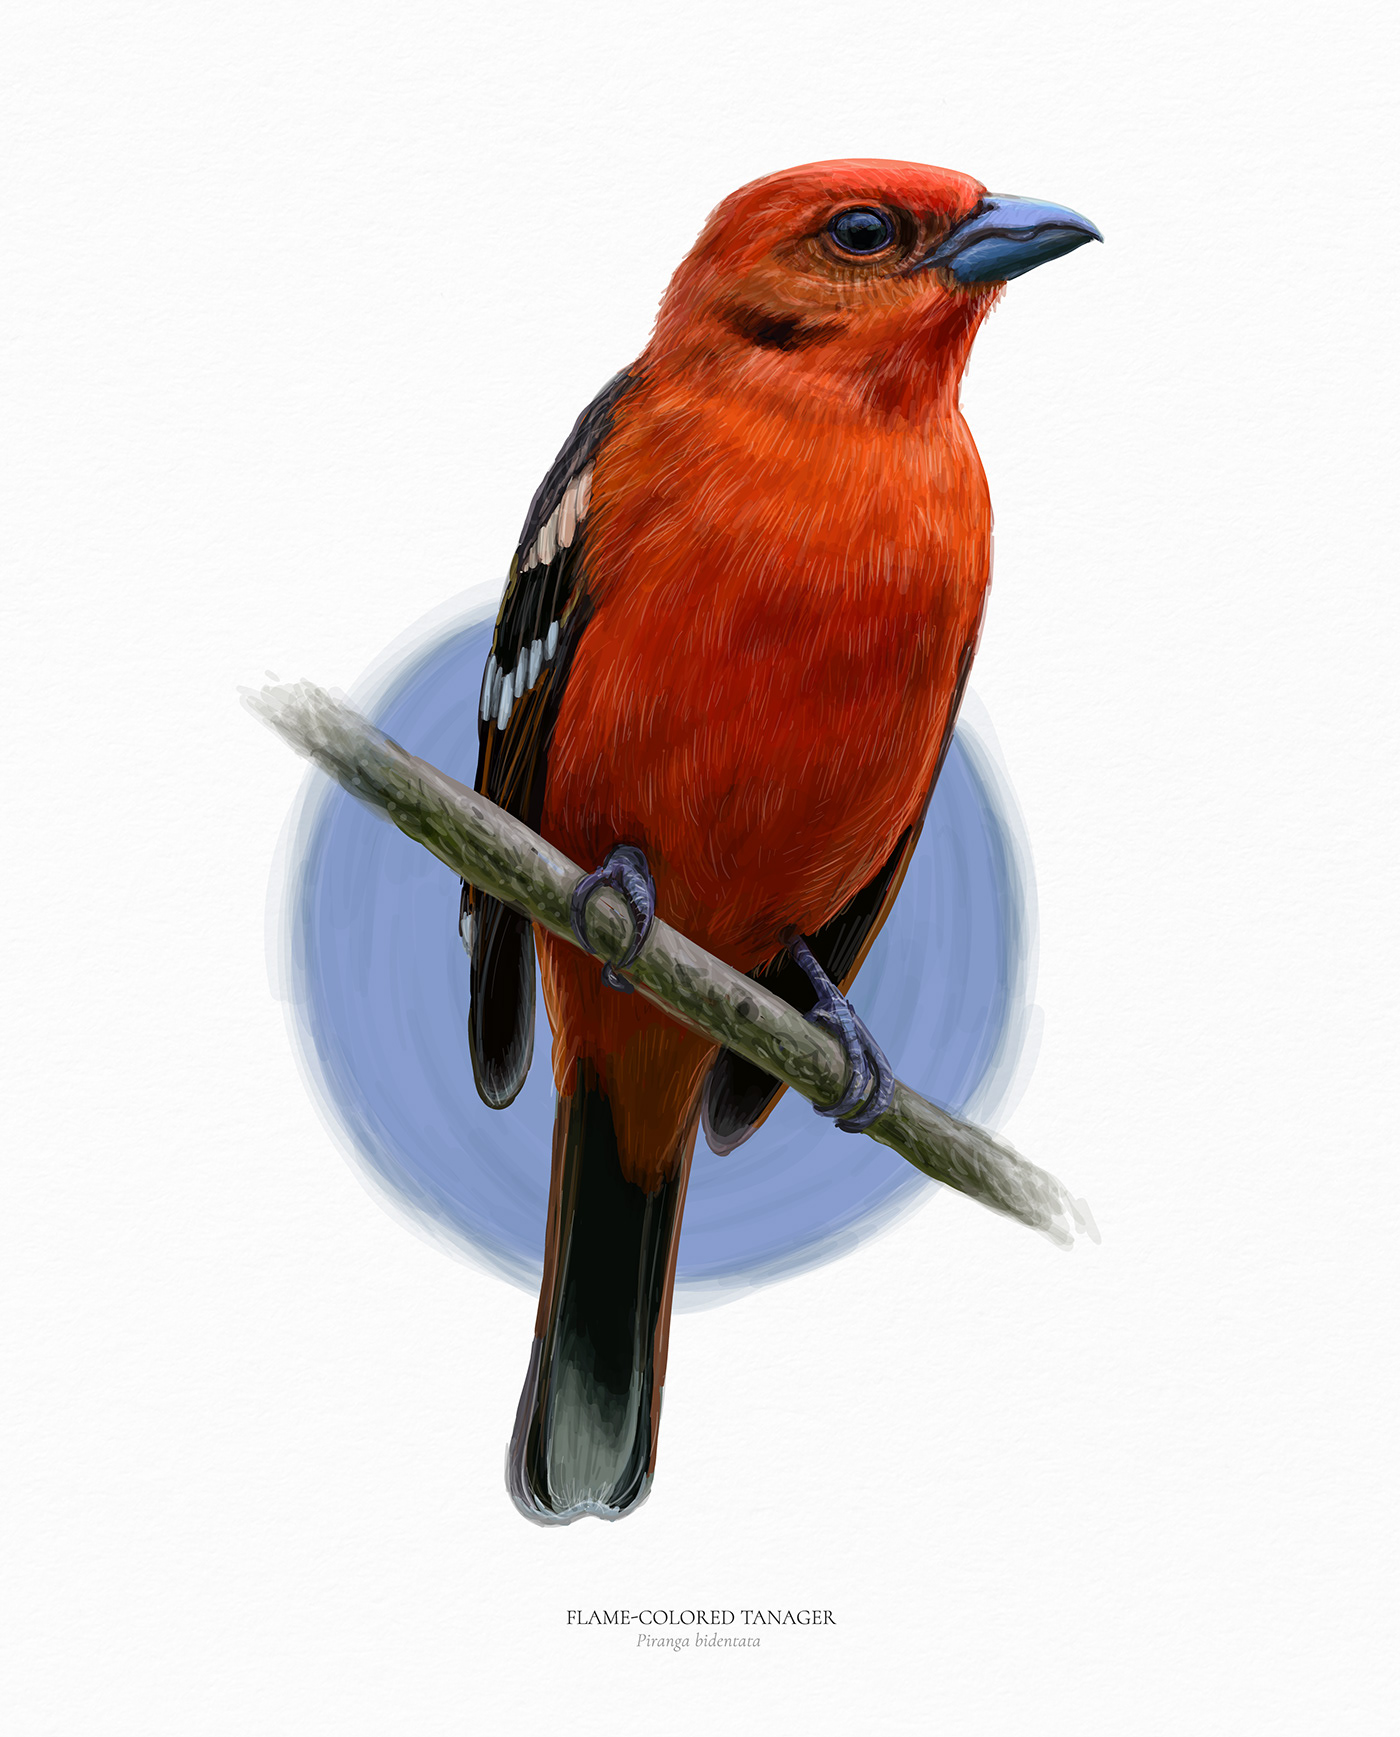 Flame-colored tanager vector hand drawn illustration by Ukranian artist Natalka Dmitrova